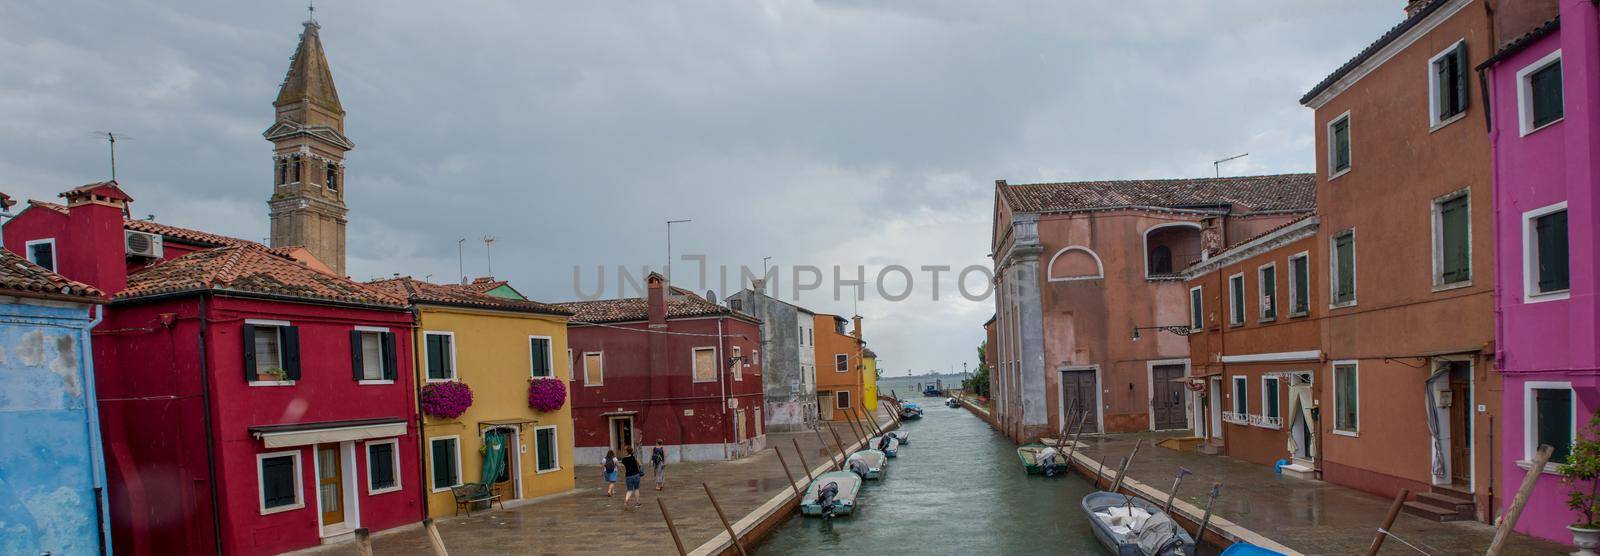 discovery of the city of Venice, Burano and its small canals and romantic alleys by shovag